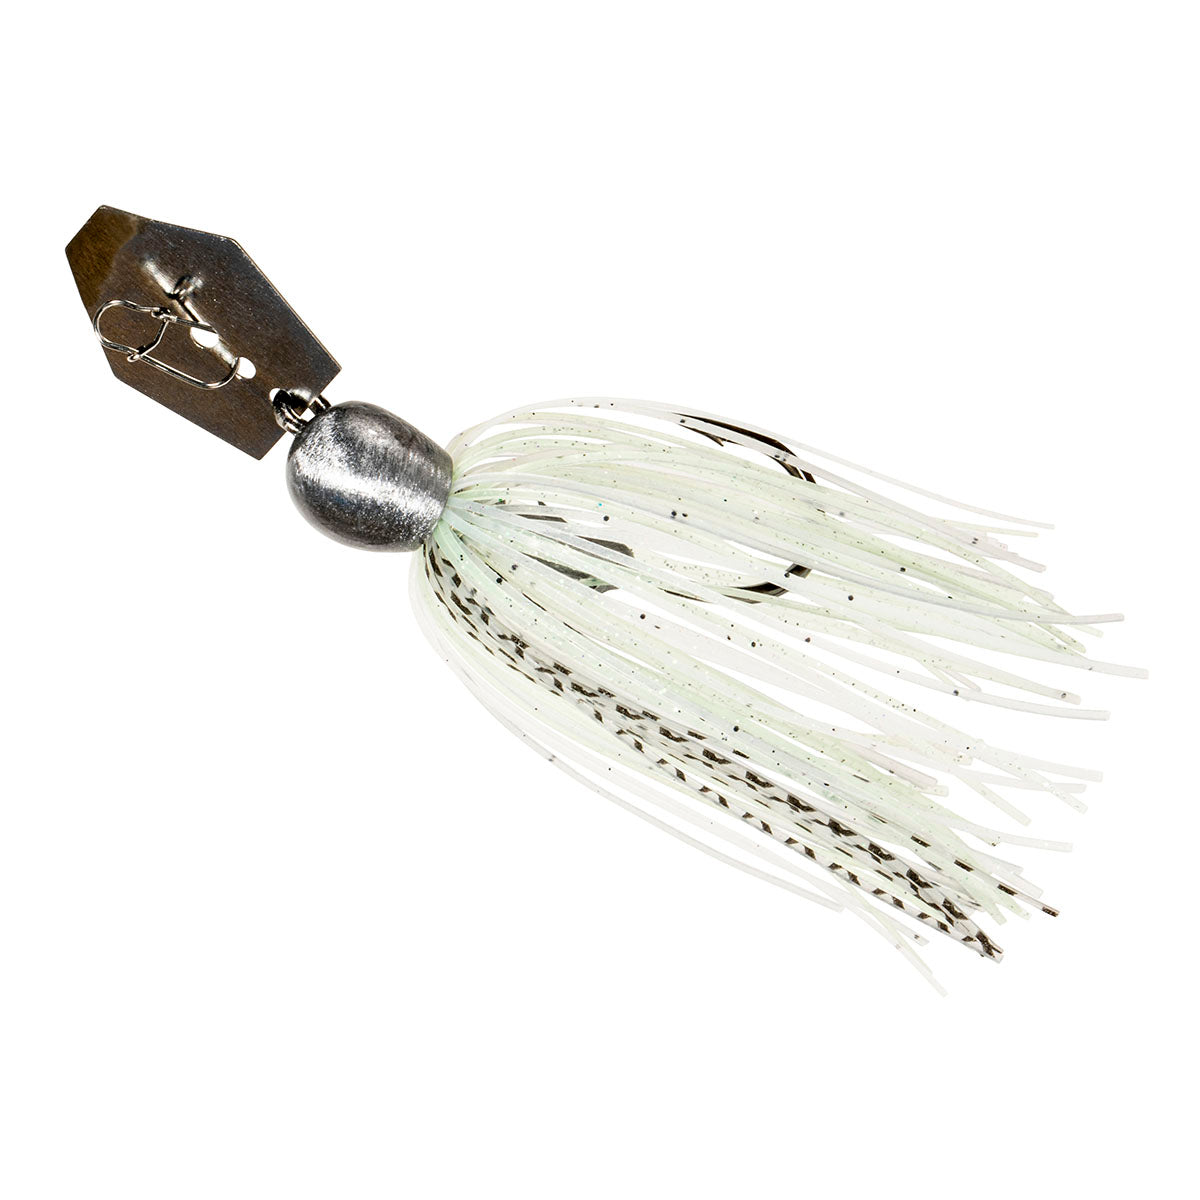 Z-MAN CHATTERSPIKE  Copperstate Tackle